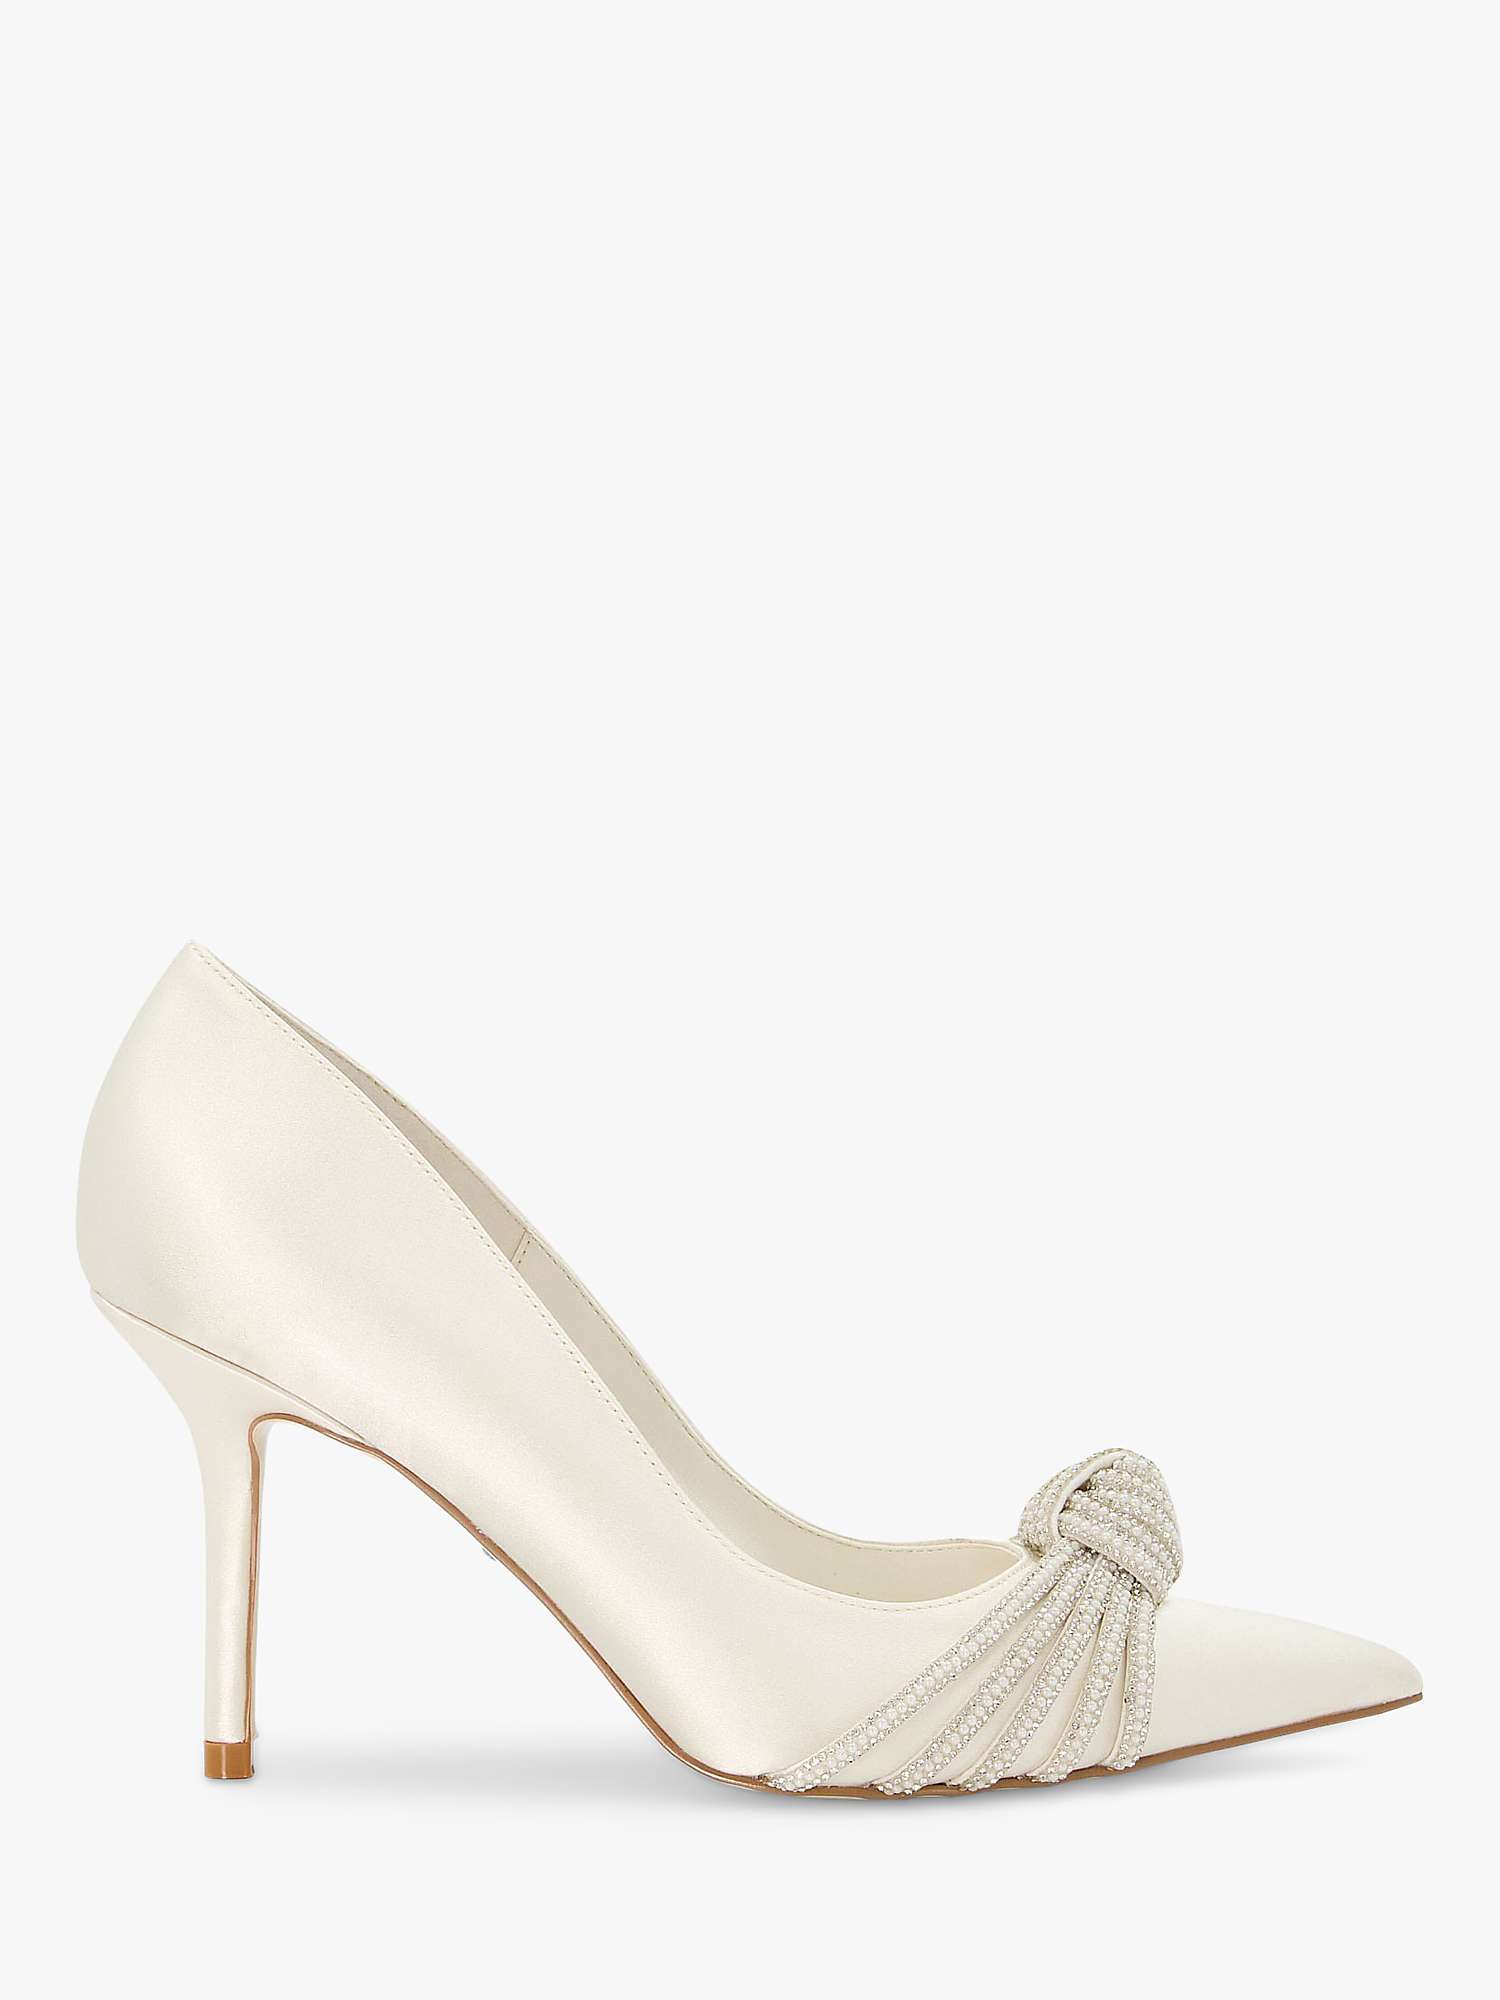 Buy Dune Bridal Collection Beauties Satin High Heel Court Shoes, Ivory Online at johnlewis.com